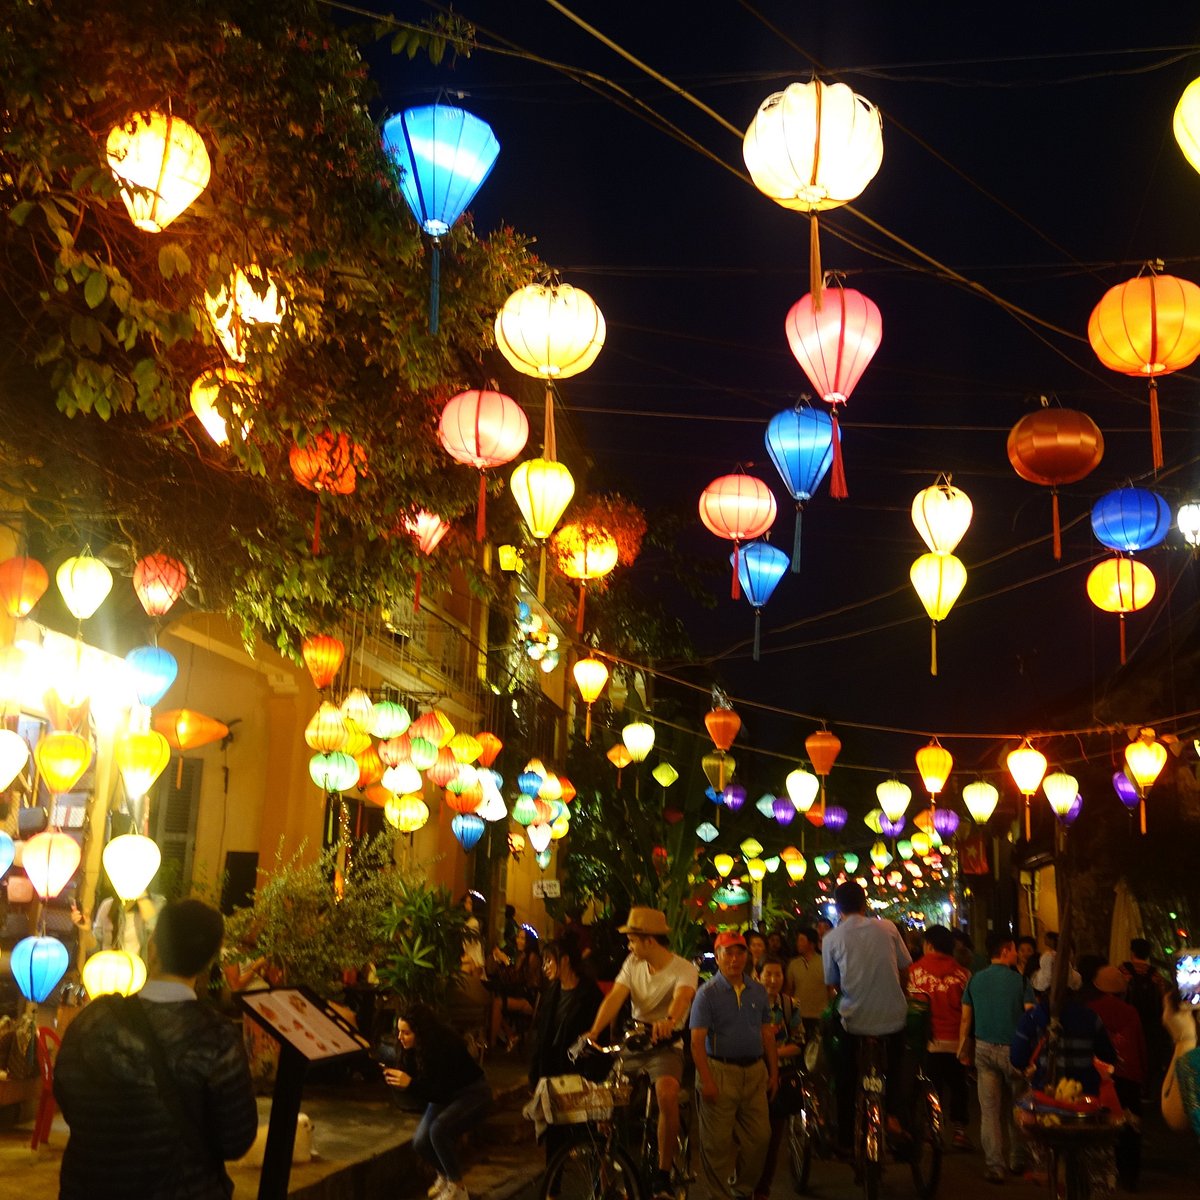 Hoi An Ancient Town - All You Need To Know Before You Go